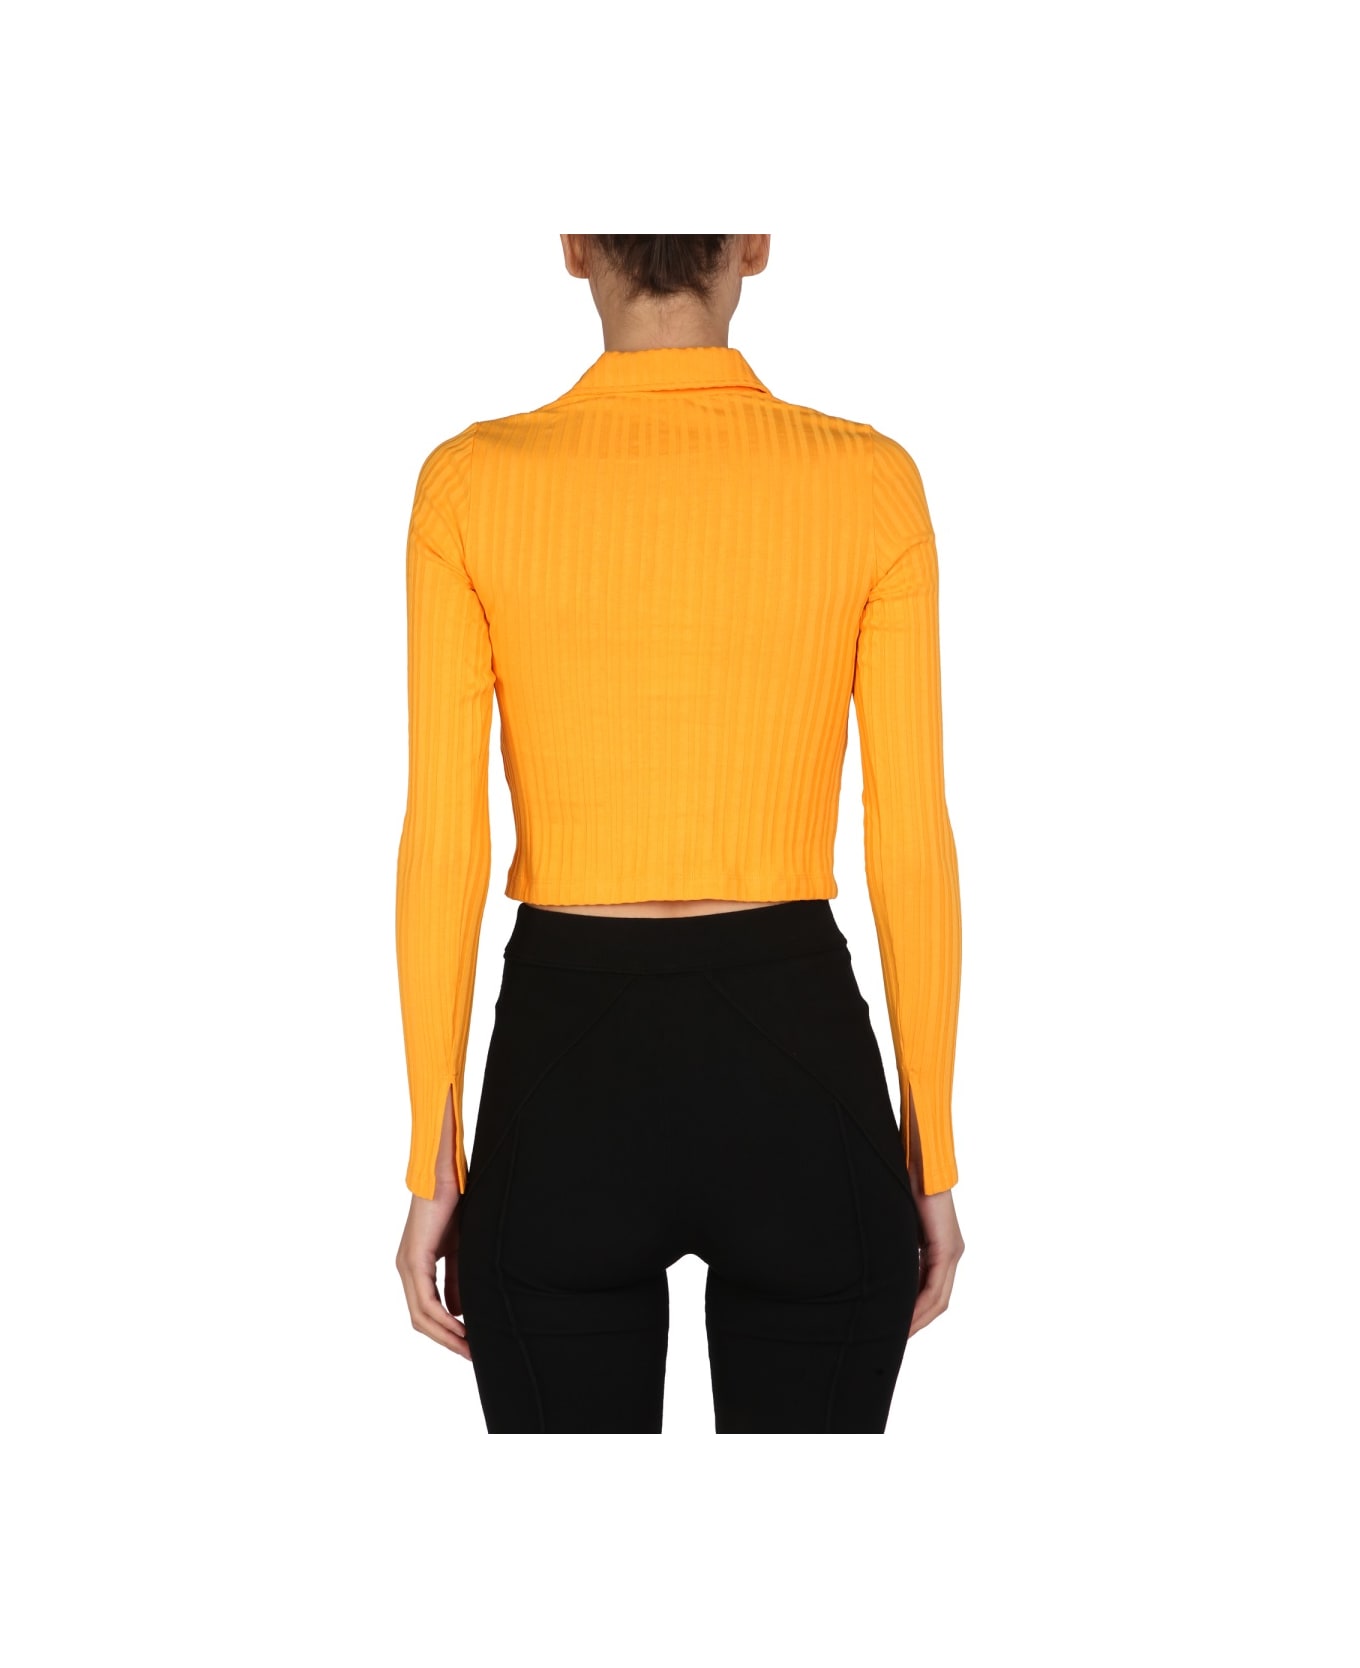 Helmut Lang Cropped Polo - YELLOW ニットウェア